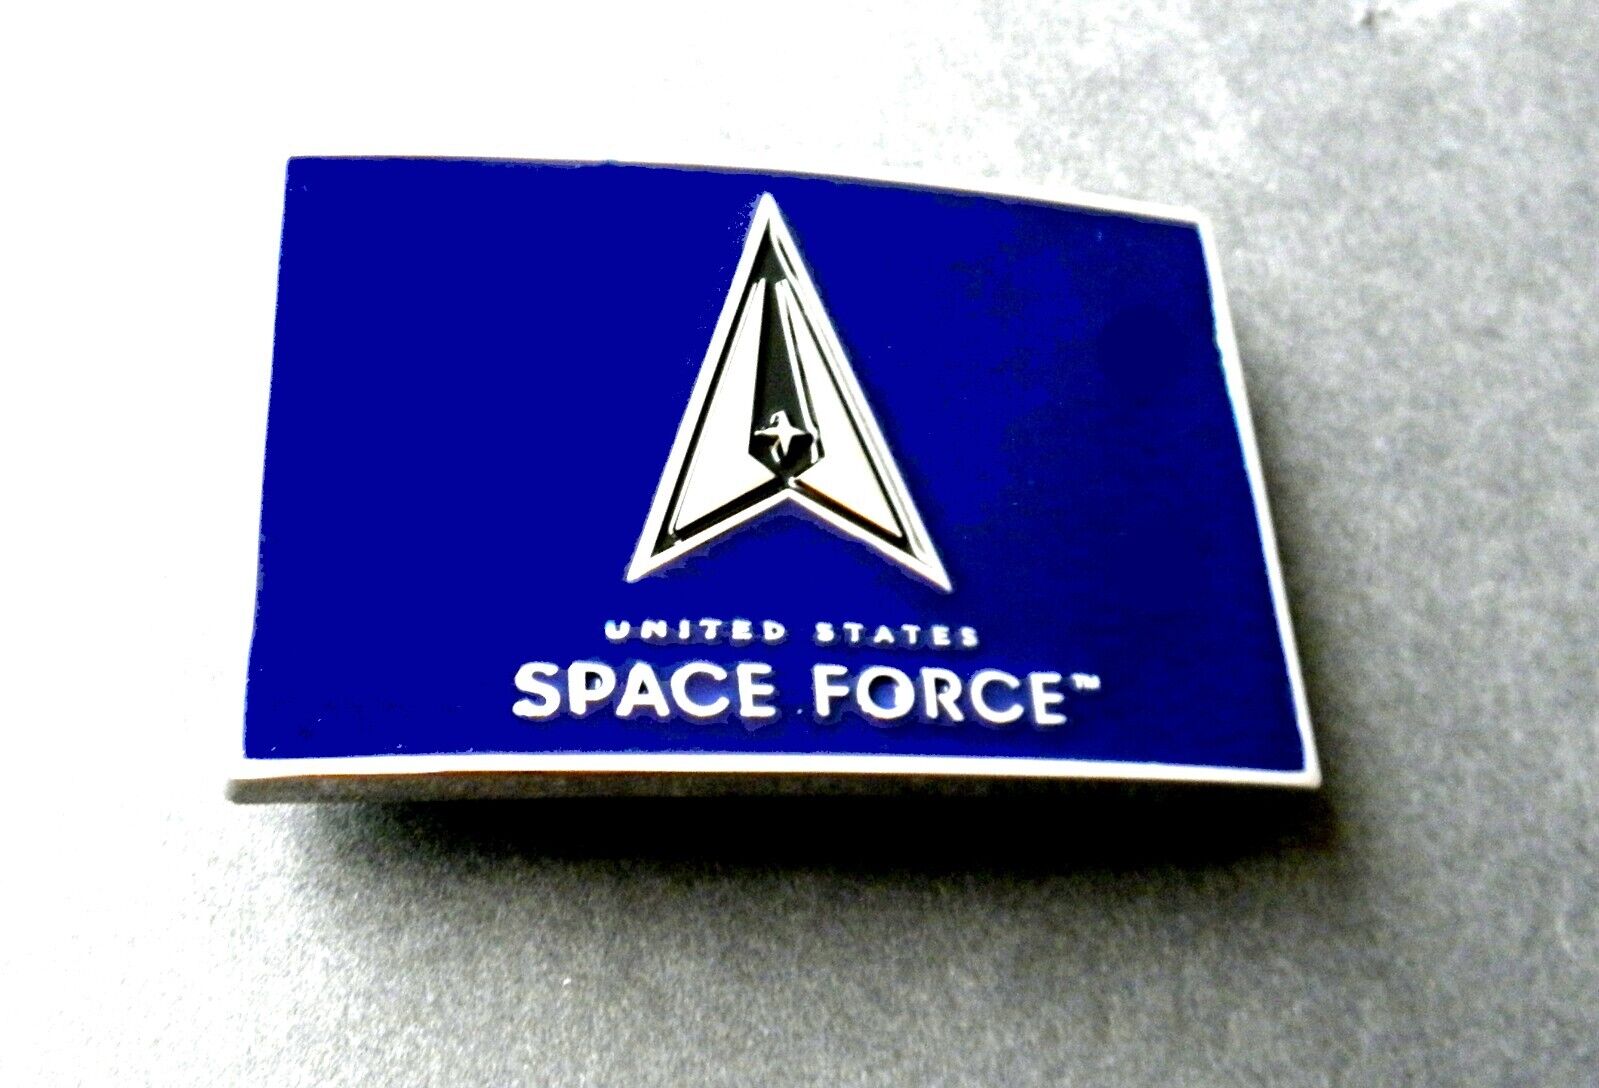 UNITED STATES SPACE FORCE USSF BELT BUCKLE 3.25 X 2.2 INCHES METAL ENAMEL